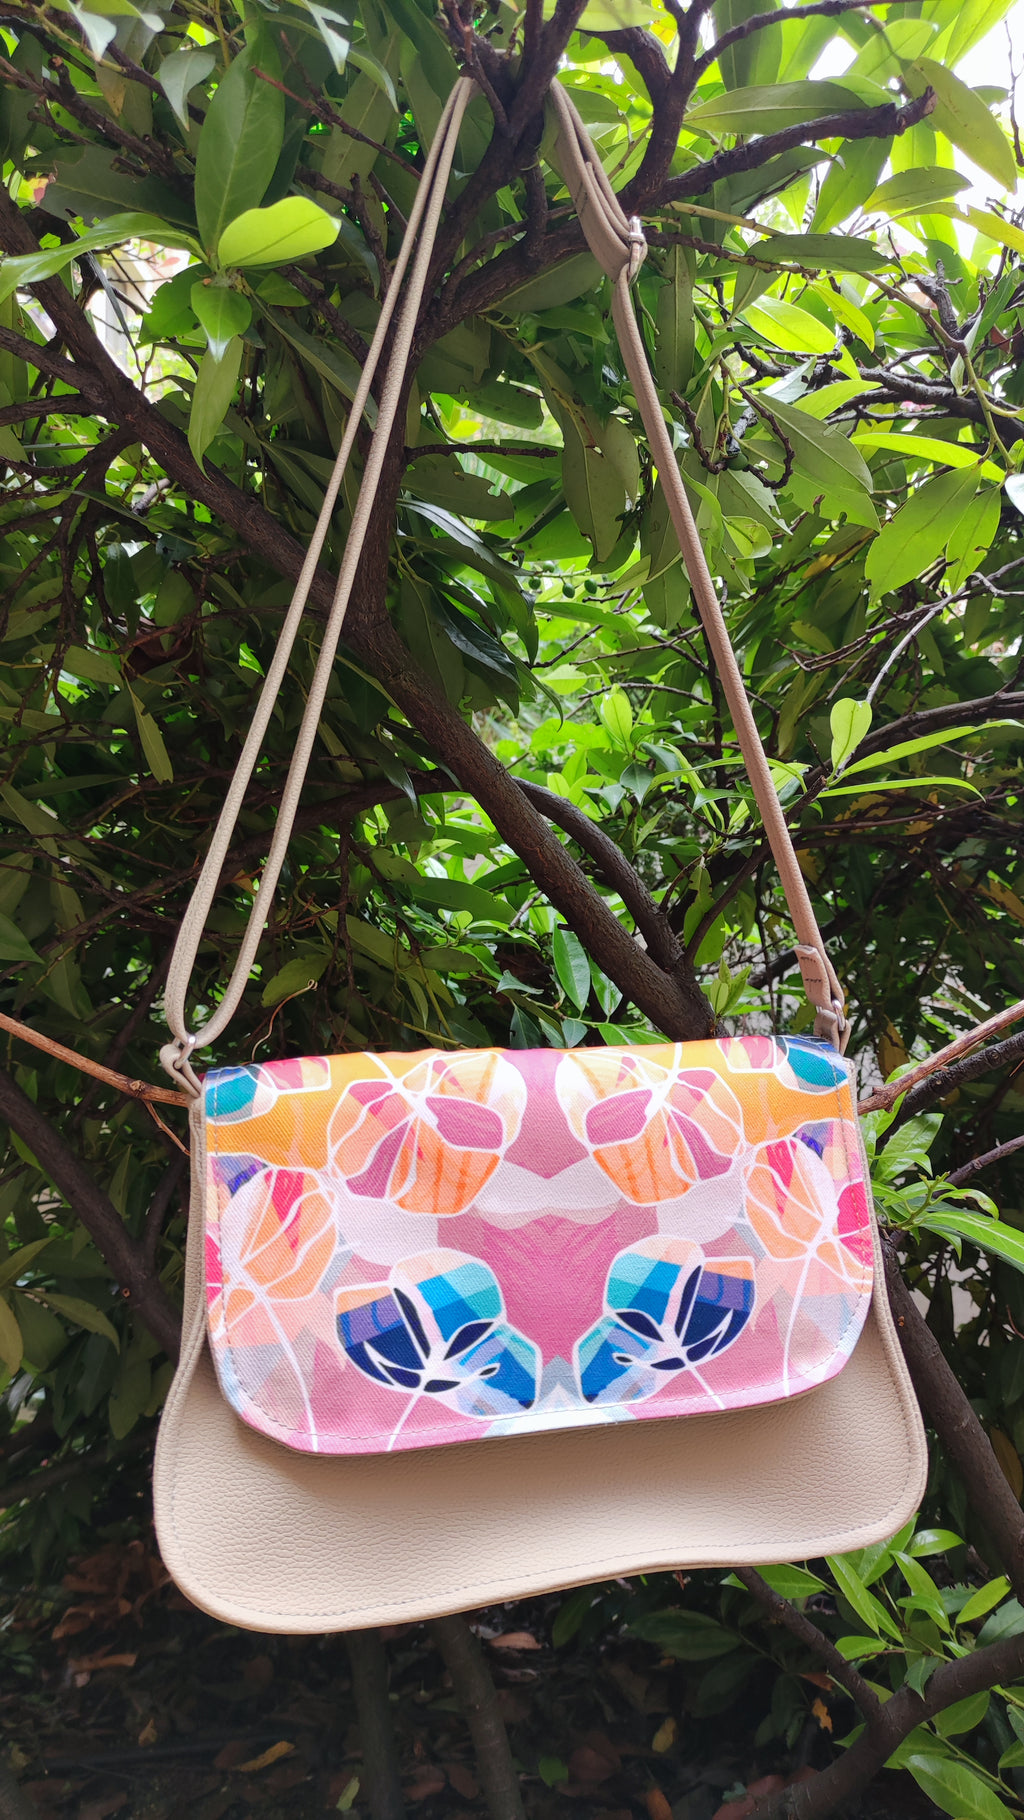 Bardo box bag - Colorful fantasy 1 - Premium bardo box bag from spring - Just lvbeige, floral, flowers, gift, handemade, leaves, nature, vegan leather, woman52.00! Shop now at BARDO ART WORKS